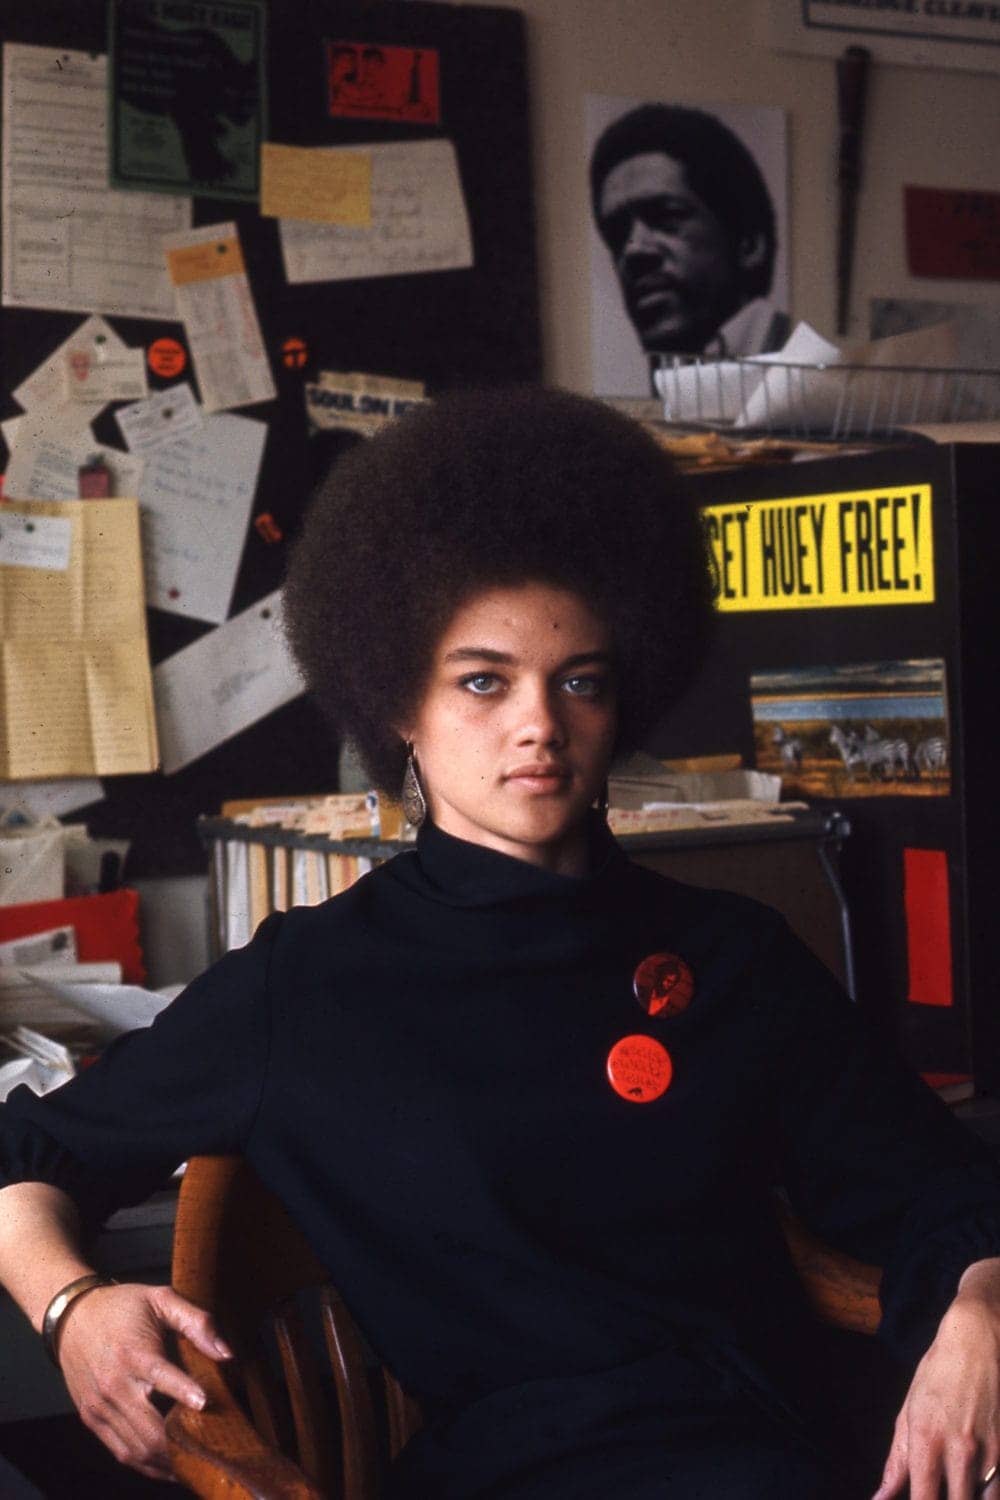 Kathleen-Cleaver-Oakland-1968-1, Jeffrey Blankfort: photographing the Black community and the Panther Party, Featured Photo Gallery World News & Views 